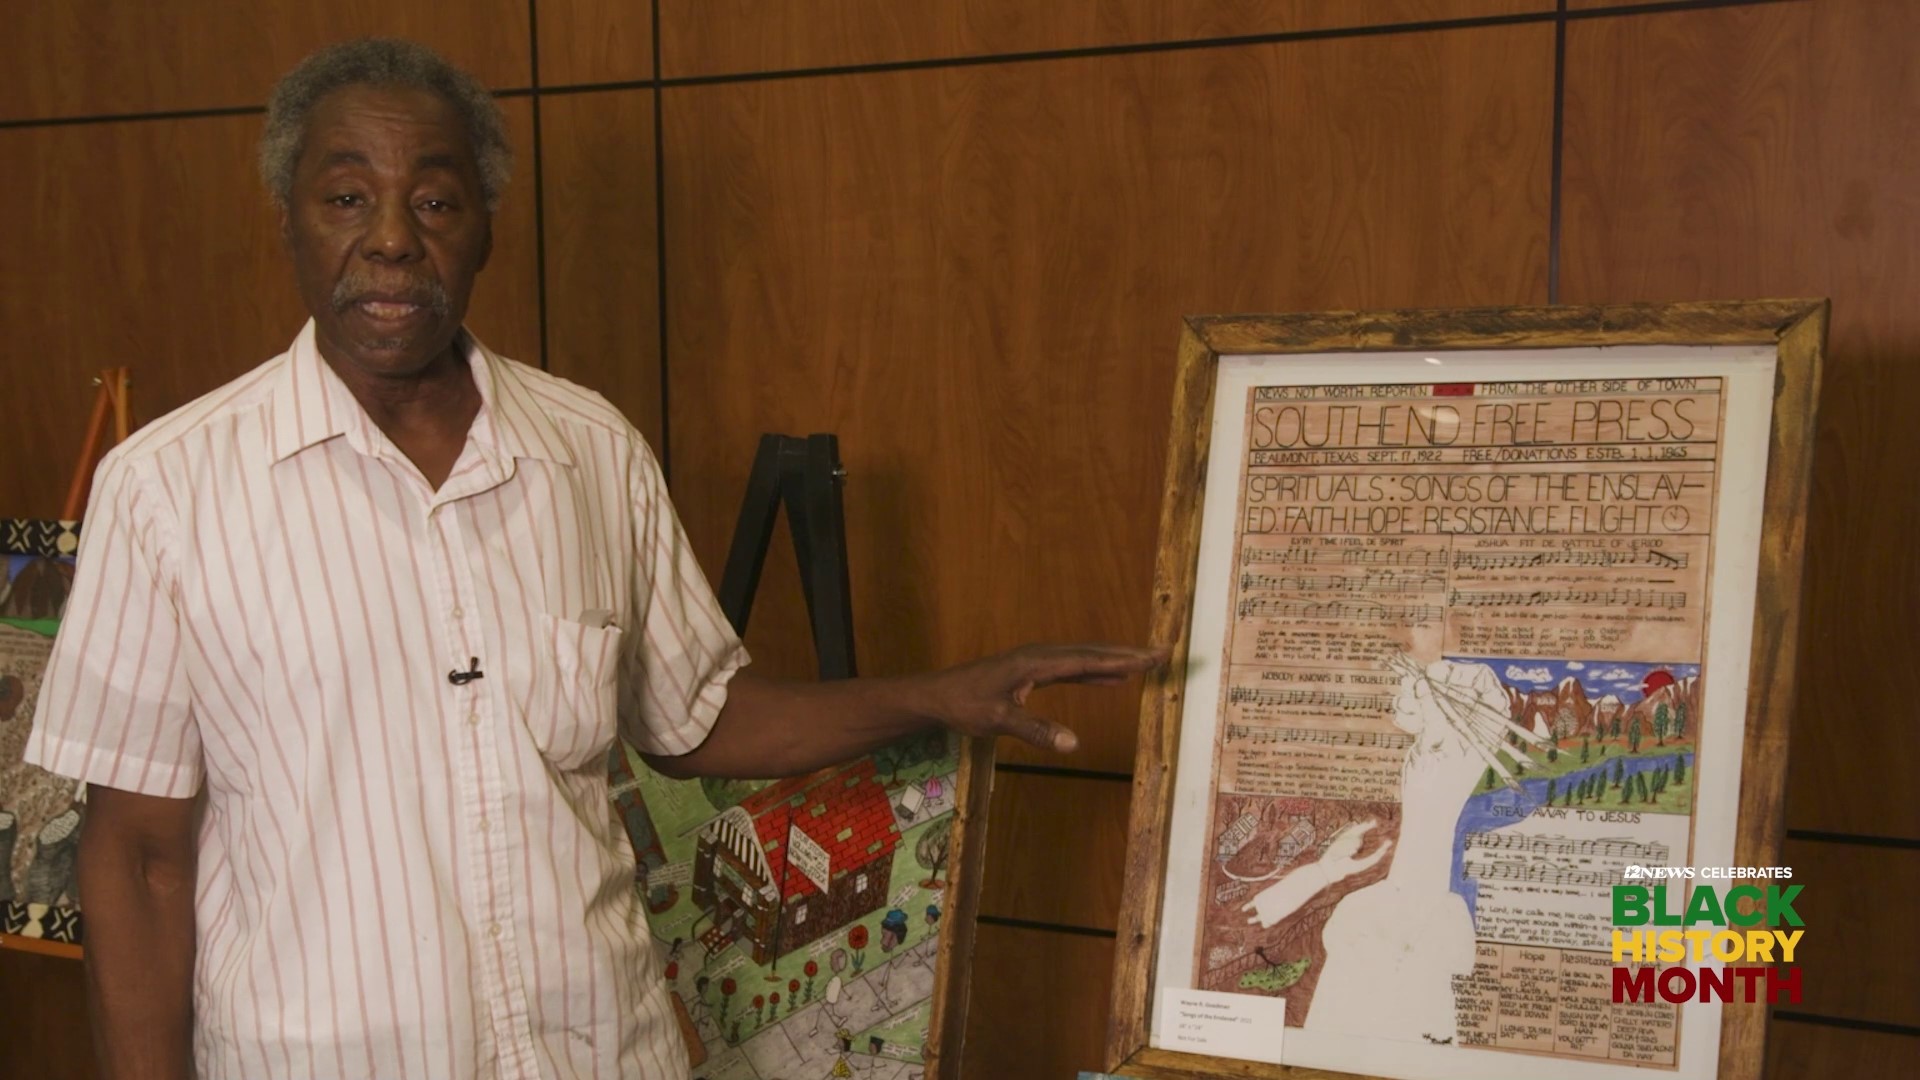 Southeast Texas artist Wayne Goodman, who was raised in Beaumont's south end, creates art that incorporates Black history throughout.